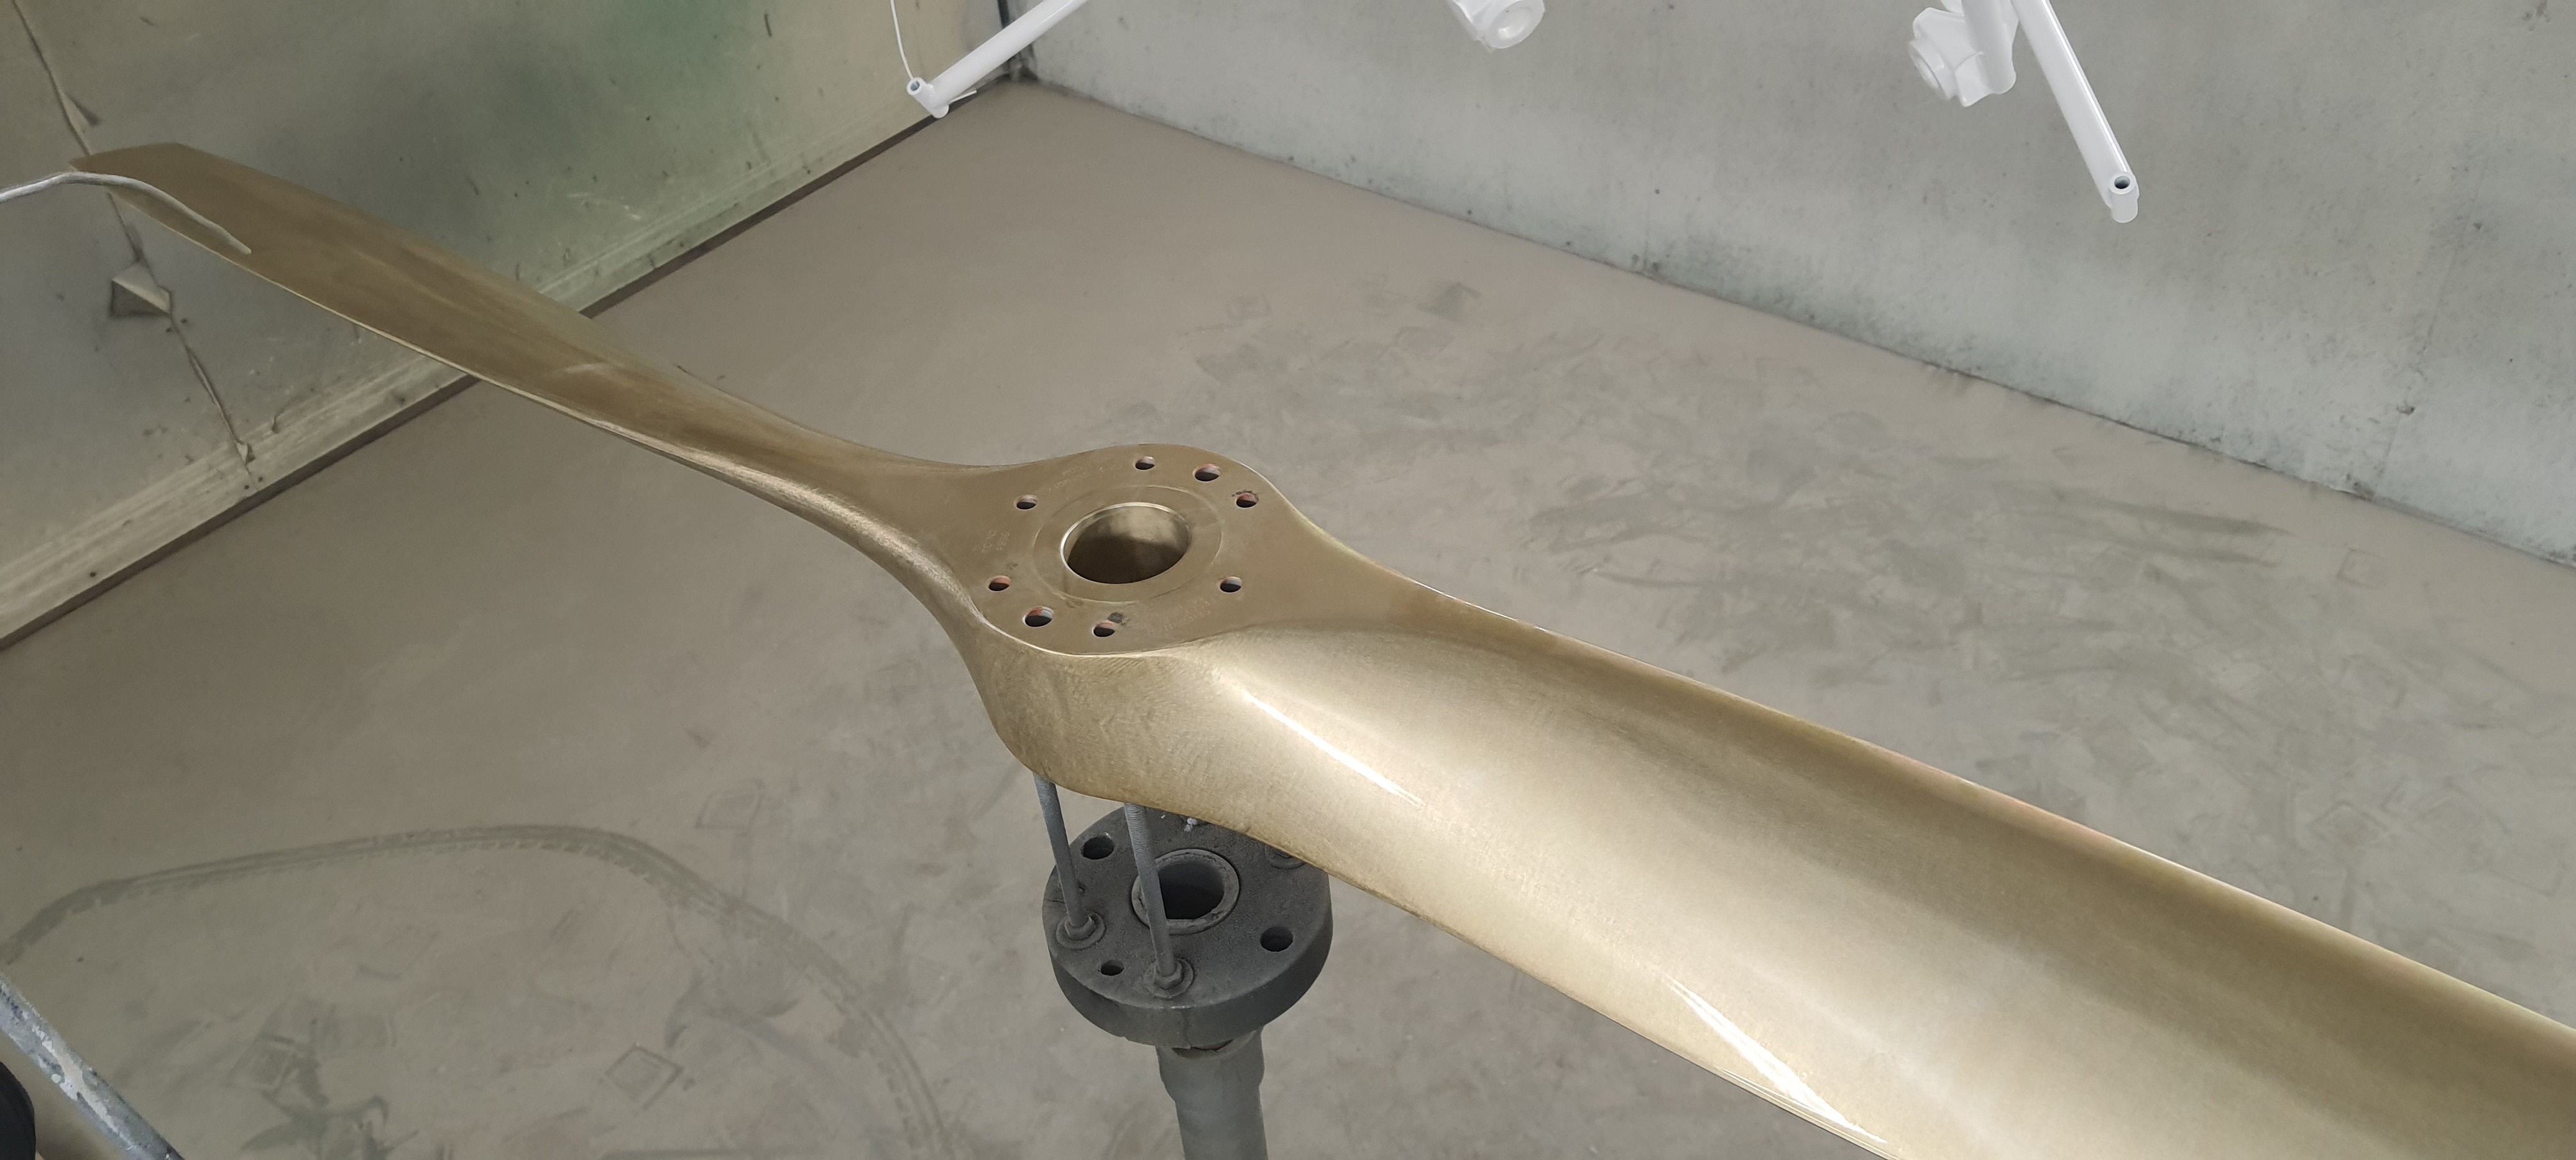 Propeller after being treated with alodine and before painting - Airservices France